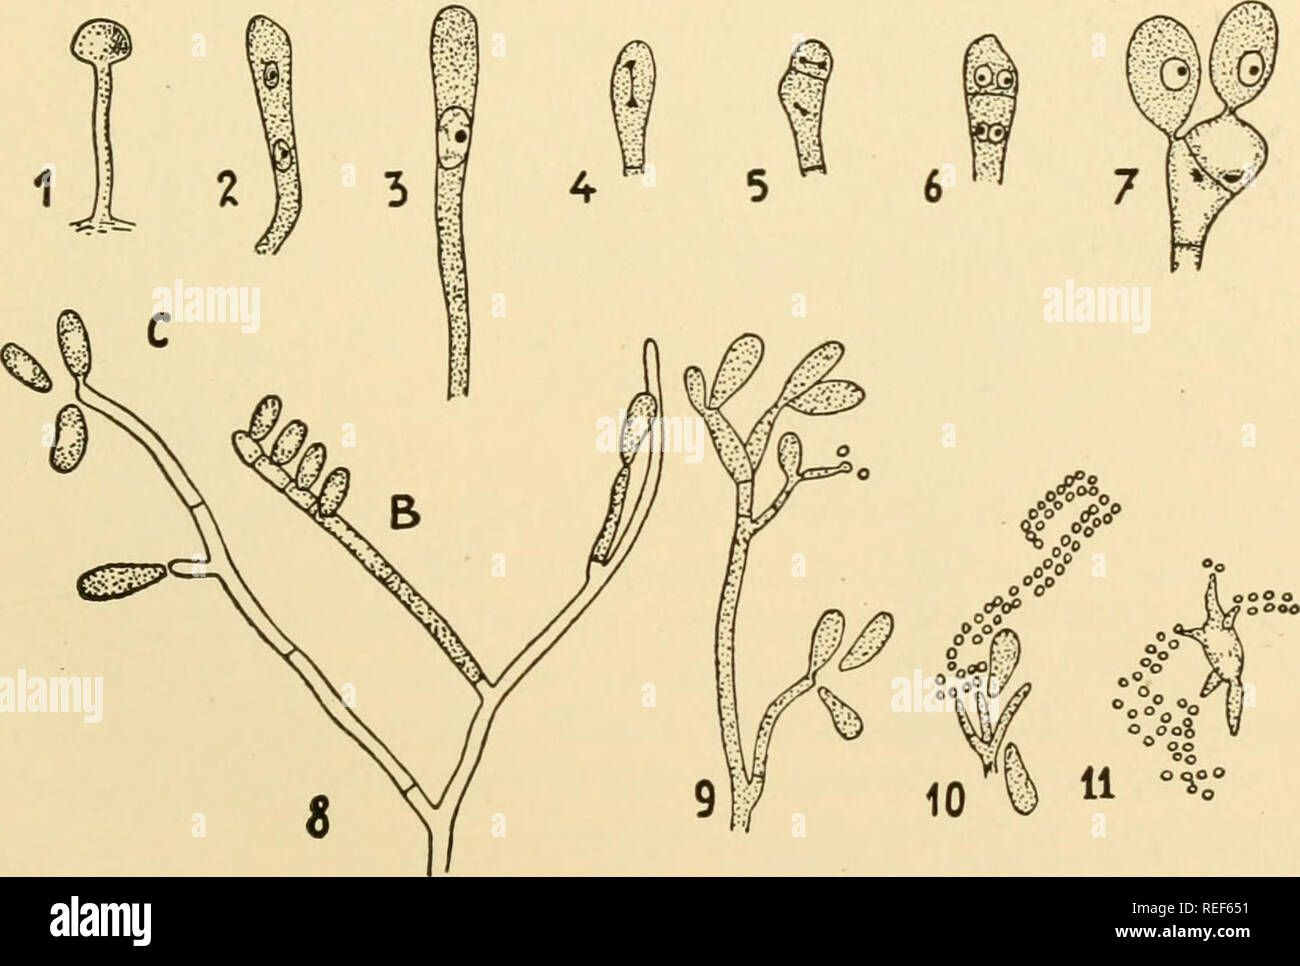 . Comparative morphology of Fungi. Fungi. AURICULARIALES 549 before spores are produced on the lateral sterigmata, reminding one of the conditions found in some smuts. In S. Michelianum (Kiihner, 1926) the uninucleate basidiospores germinate with a short sterigma which bears a secondary spore only slightly smaller than itself. This becomes three to six septate and produces one to two very small, ellipsoidal conidia from each cell. The binucleate basidiospores form a septum between the nuclei then germinate as above. The morphological significance lies in the increasing differentiation of the z Stock Photo